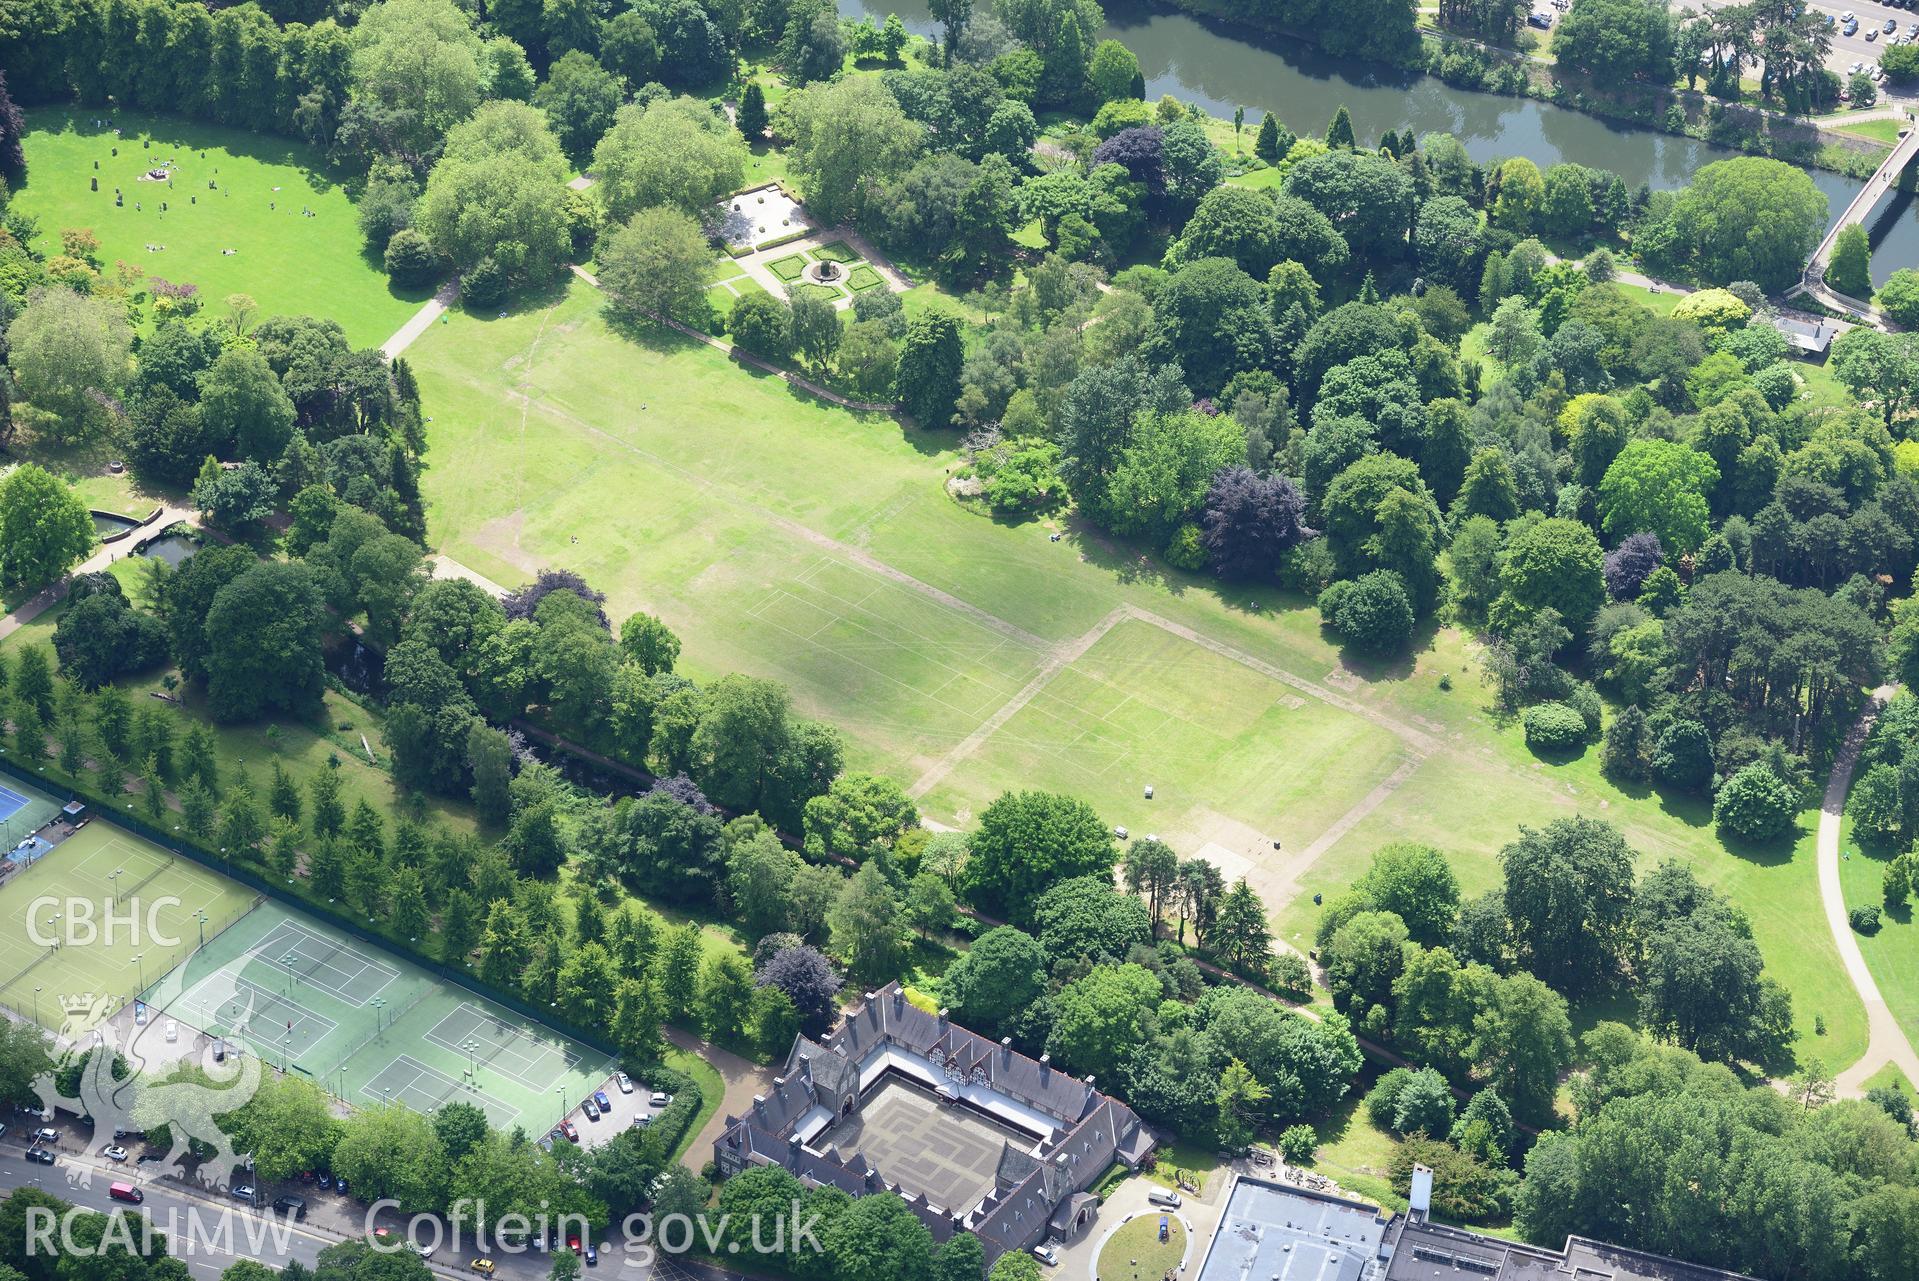 Cardiff Castle Stables, Bute Park and Blackfriars Dominican Priory, Cardiff. Oblique aerial photograph taken during the Royal Commission's programme of archaeological aerial reconnaissance by Toby Driver on 29th June 2015.